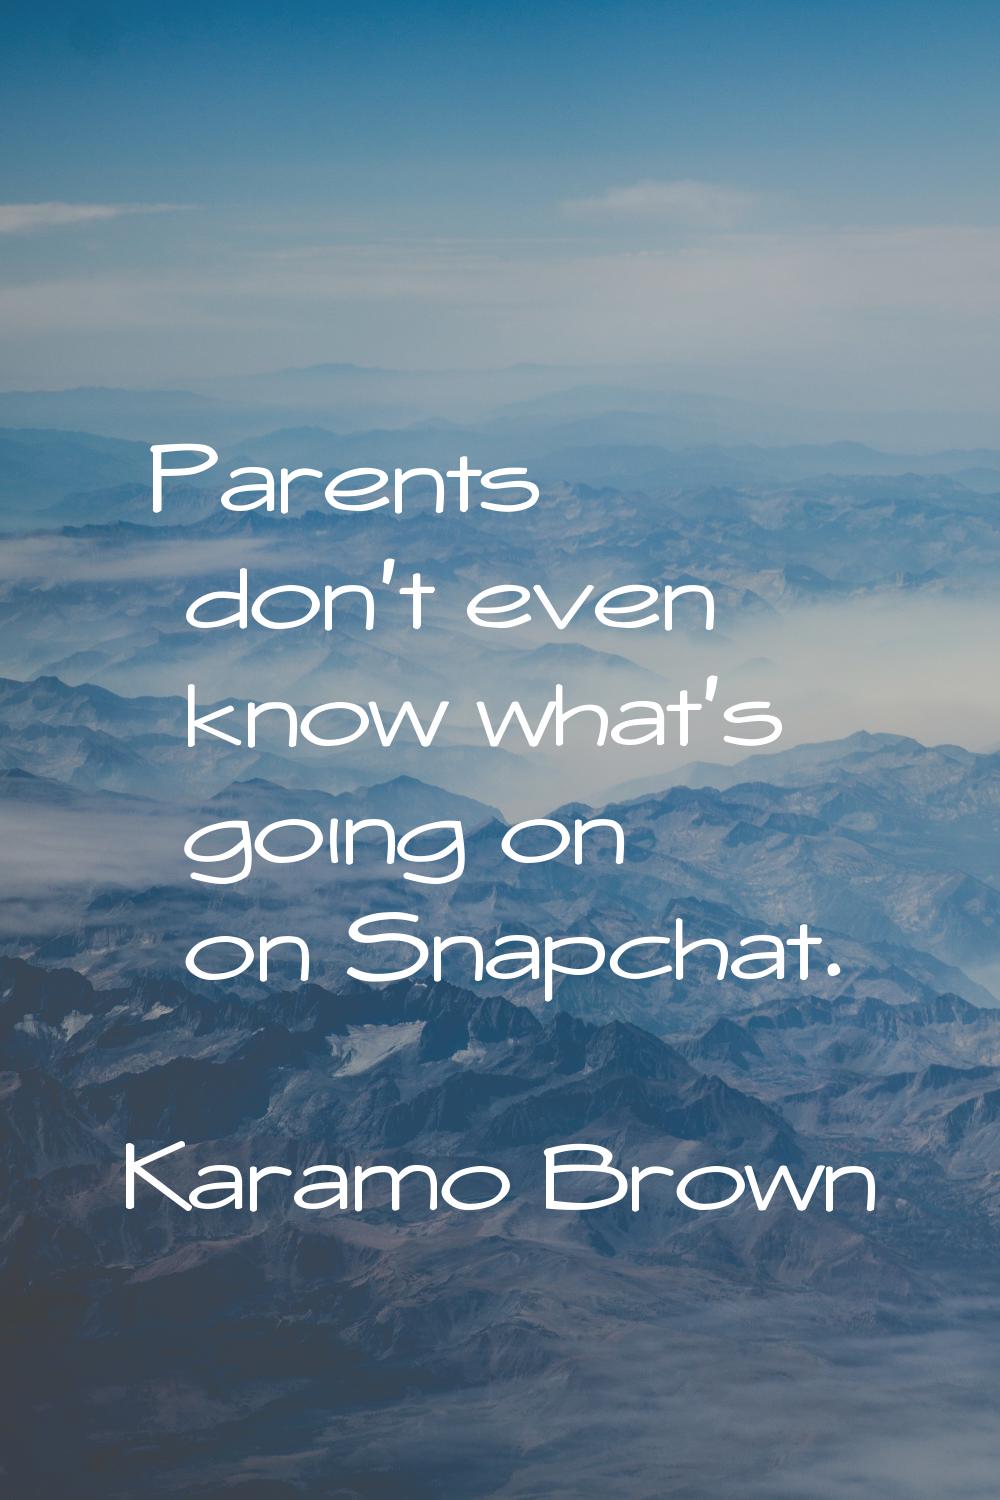 Parents don't even know what's going on on Snapchat.